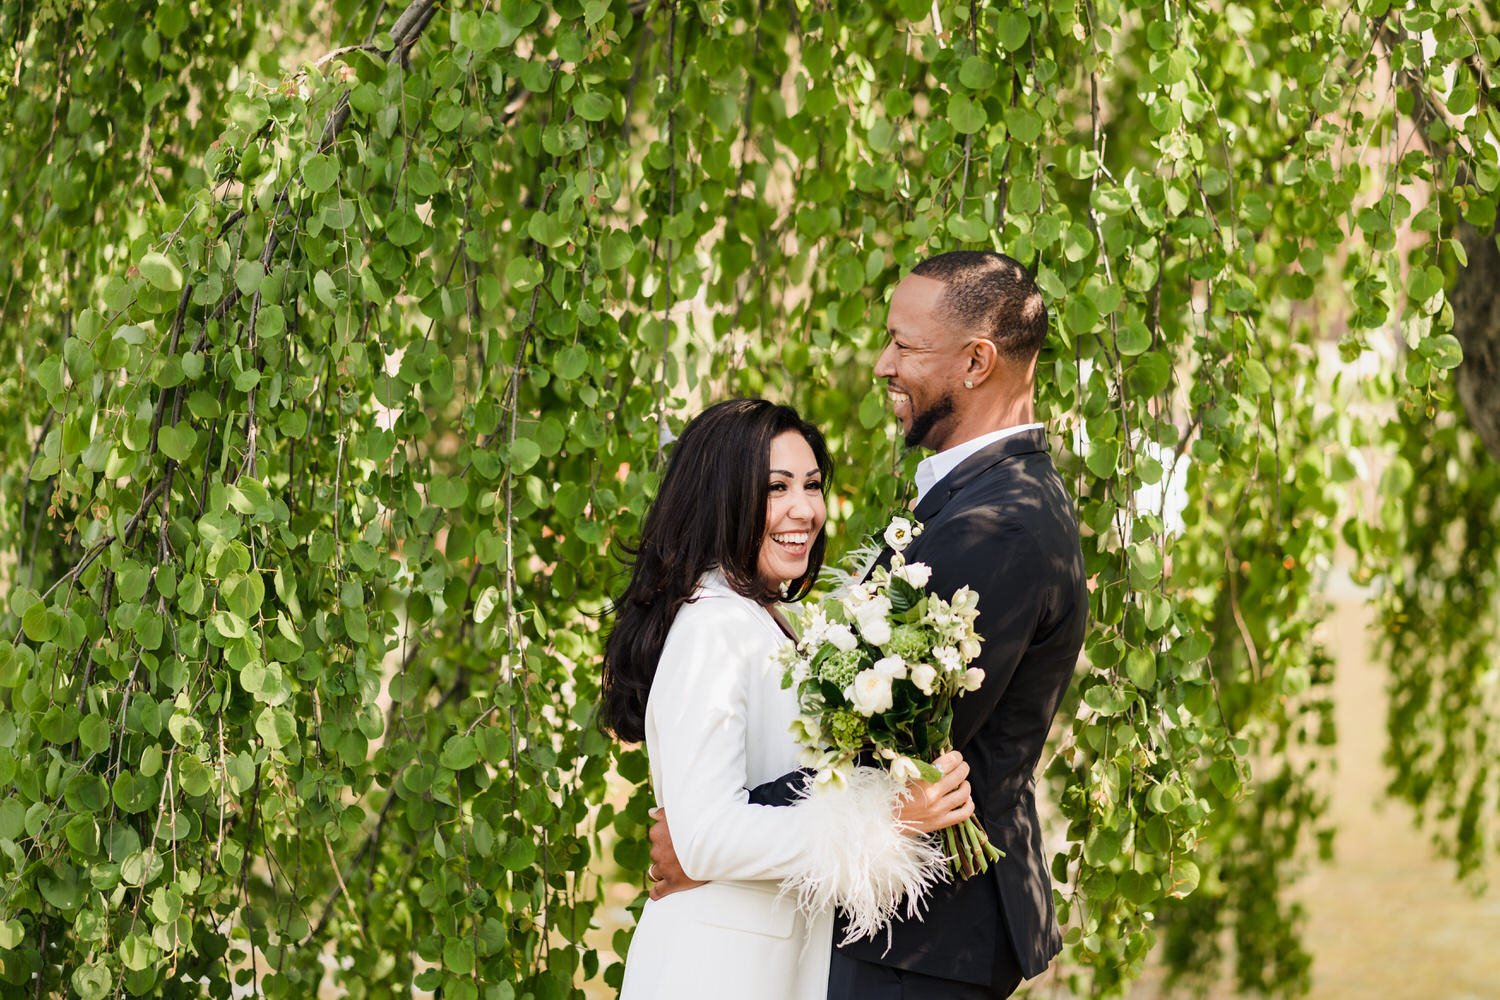 A bride and groom embracing under a willow tree during their Boston City Hall wedding.